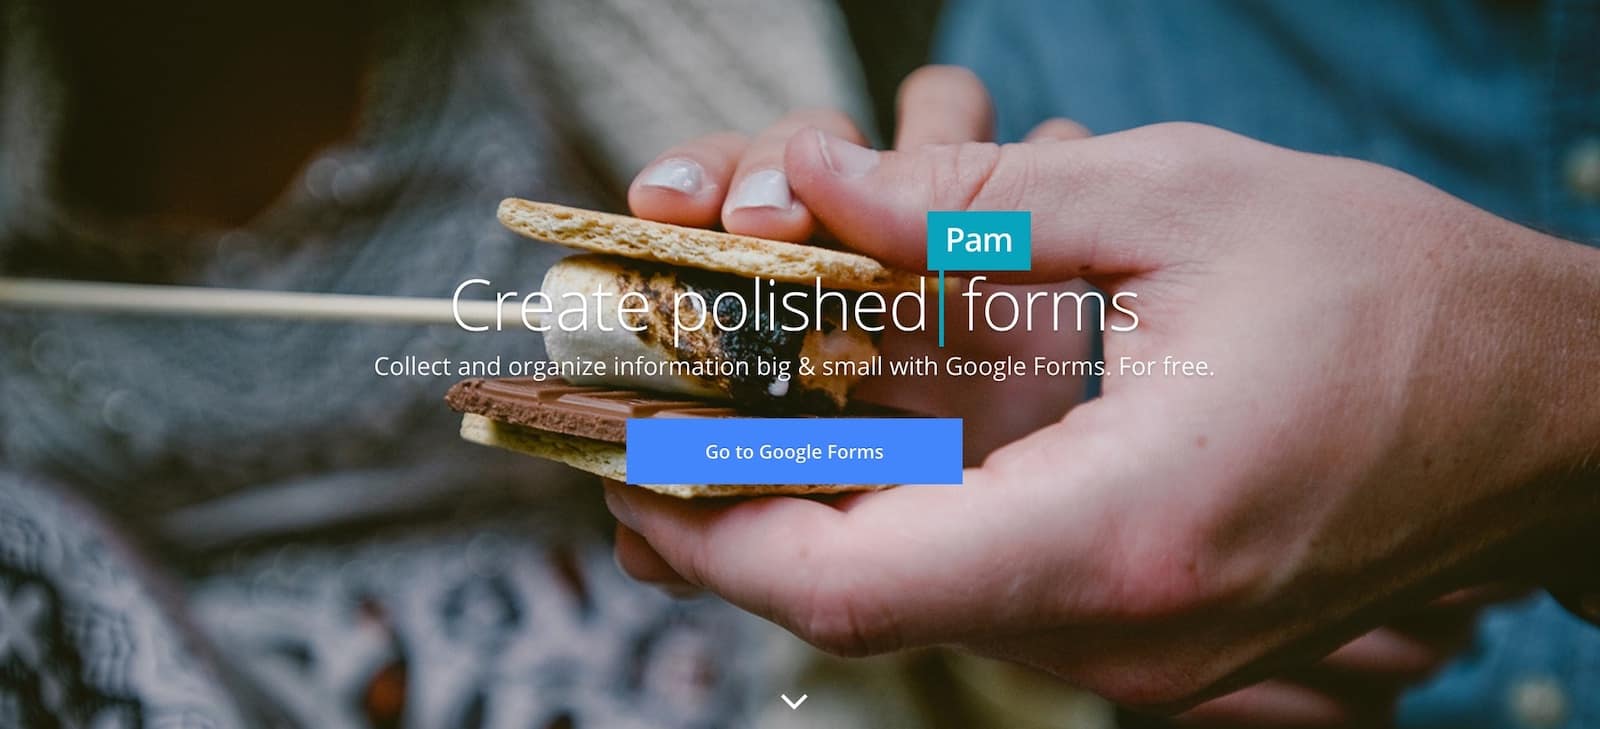 How to pre-populate Google Forms using UTM parameters